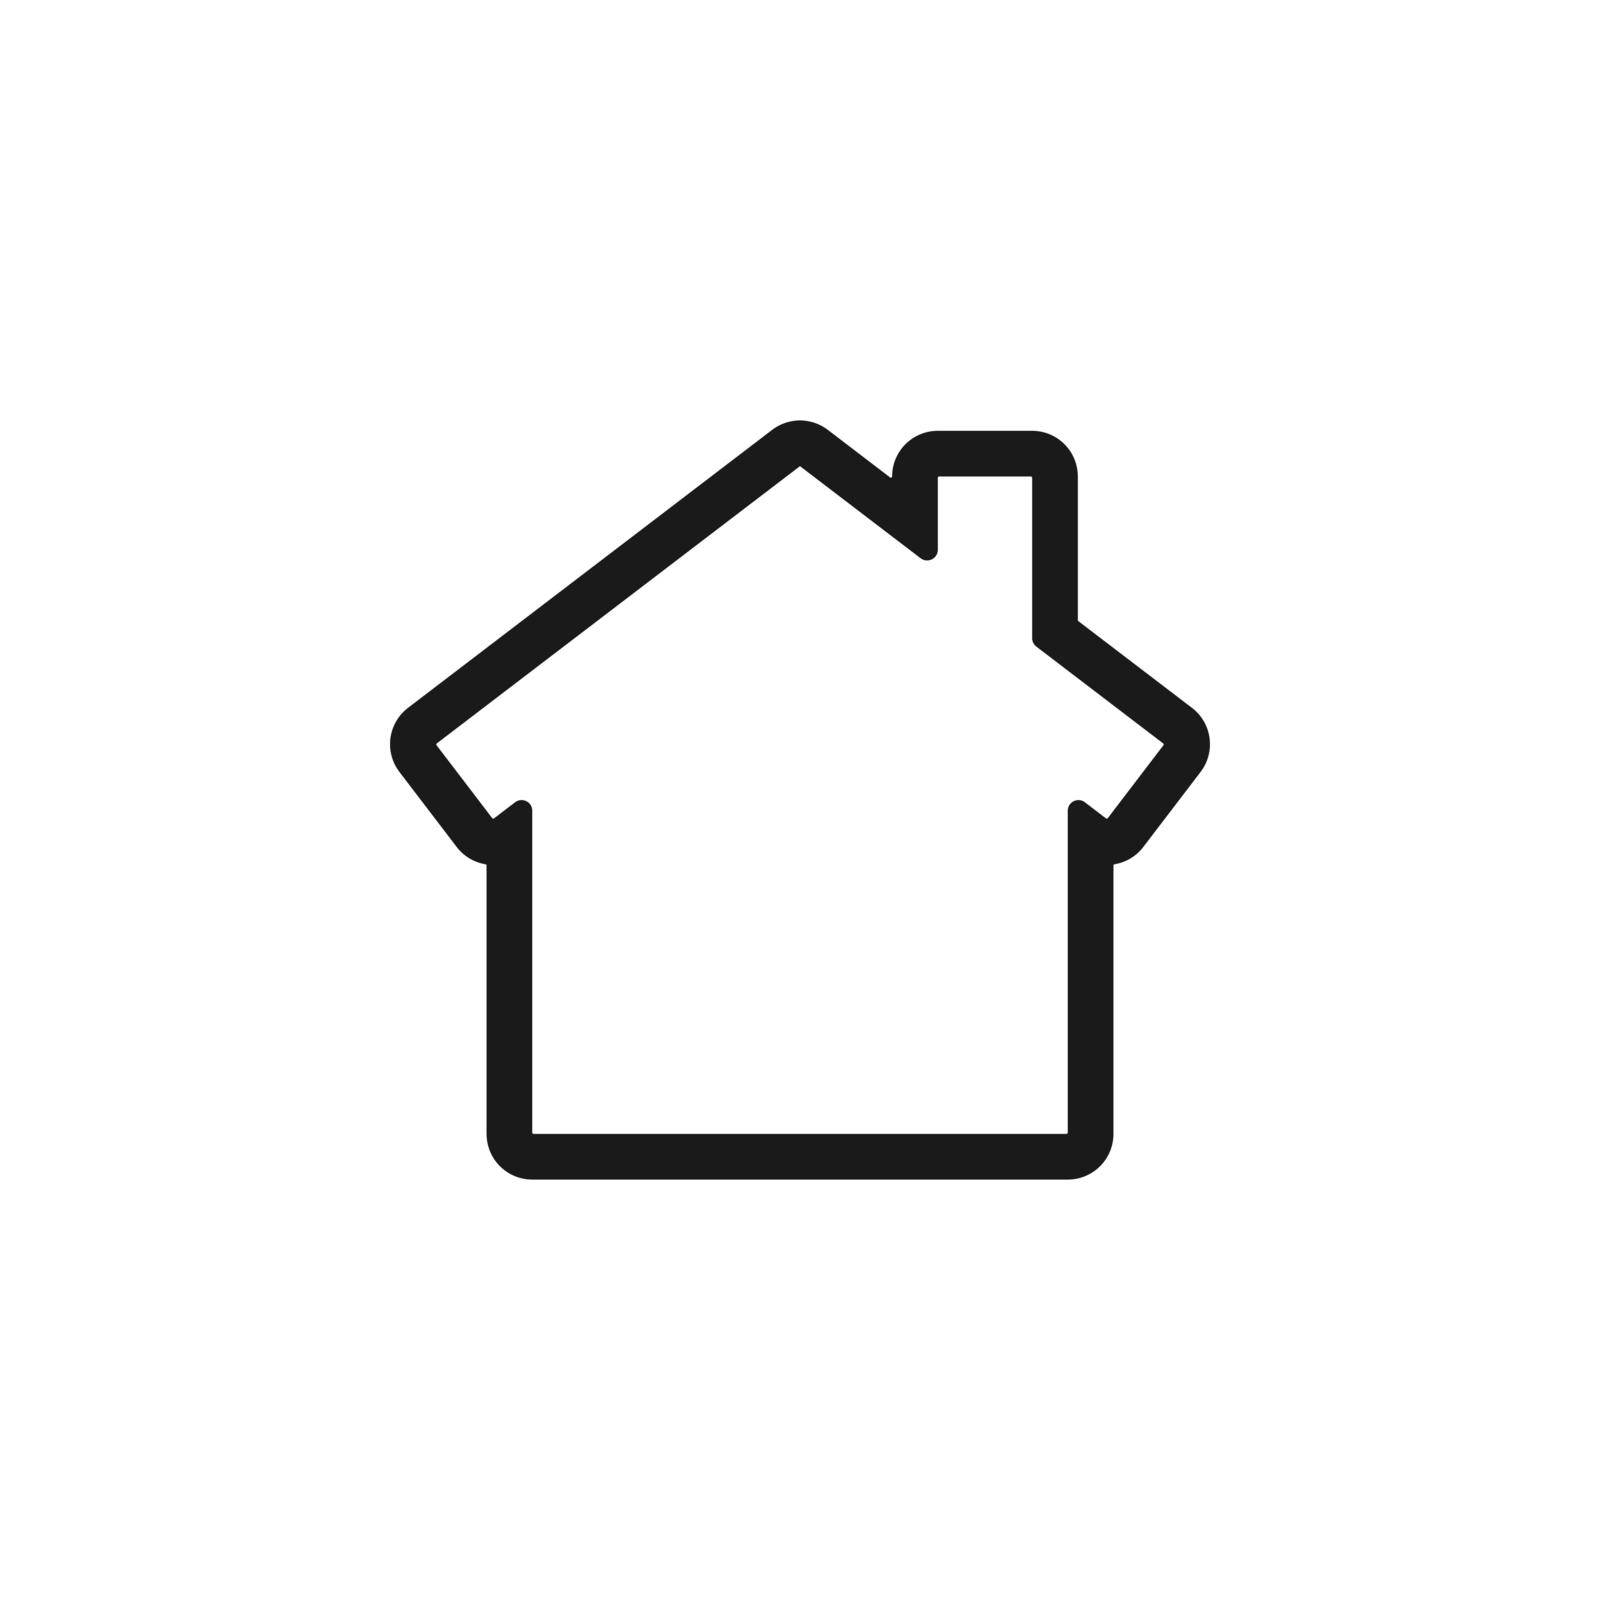 Home icon. House symbol. Simple vector illustration EPS 10 by TopRated